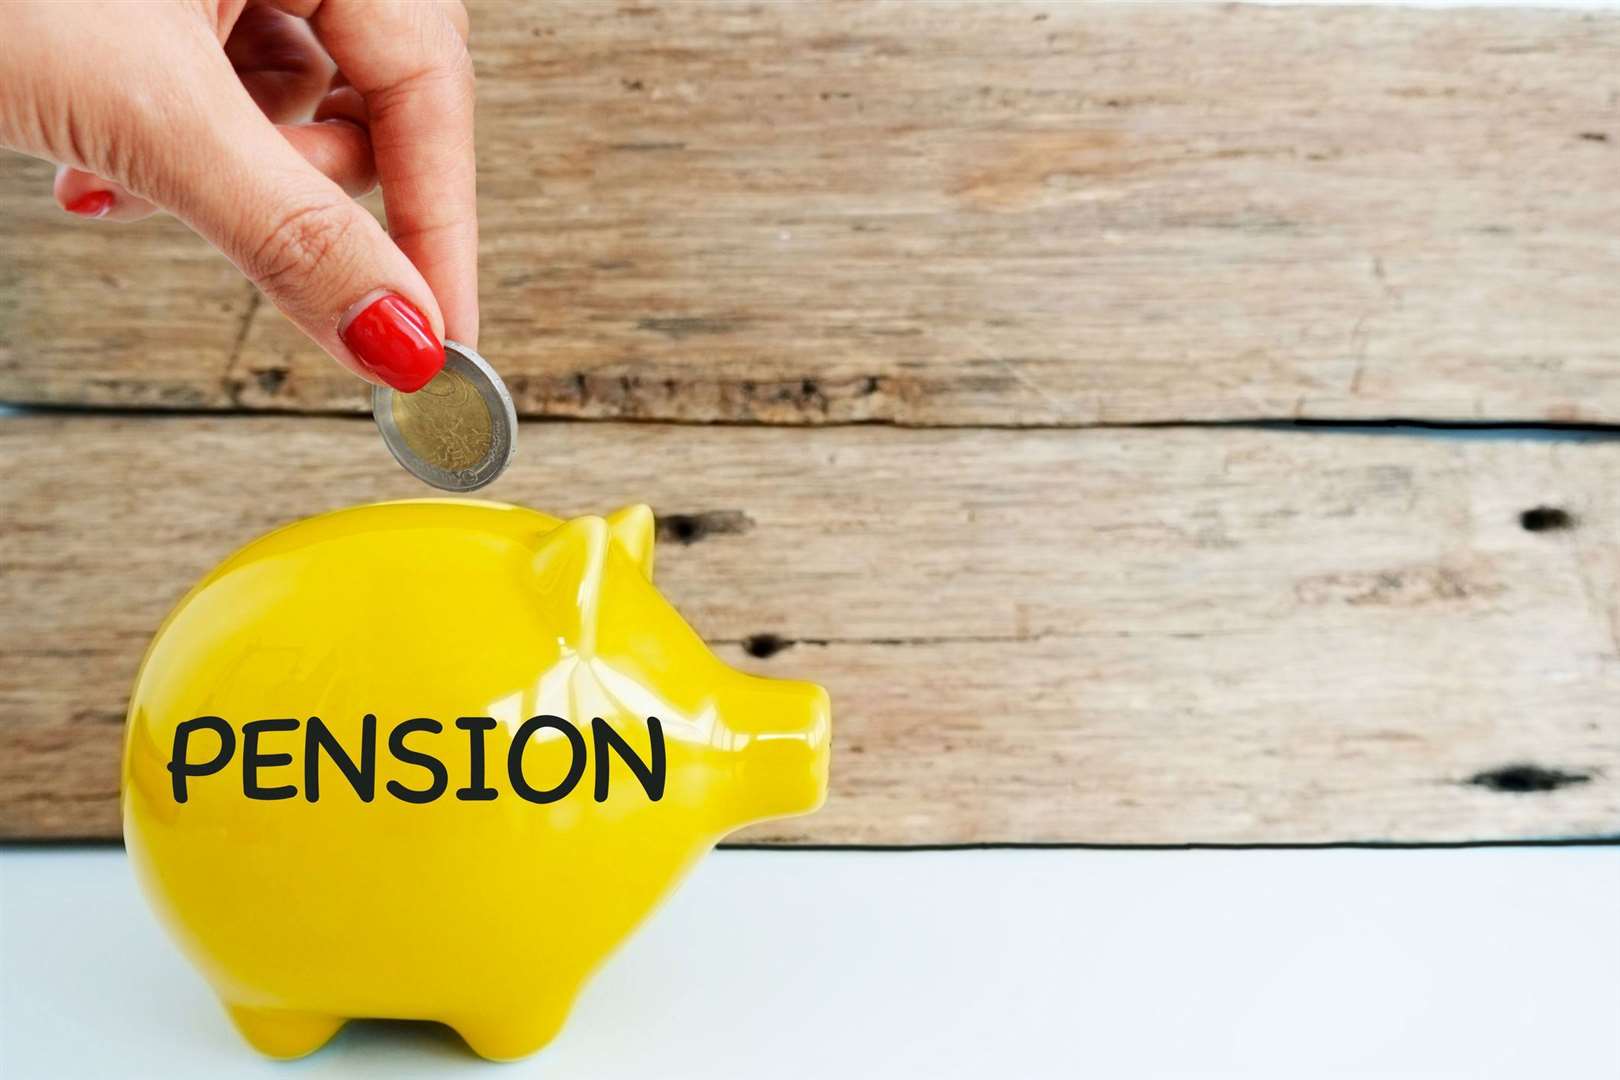 A new report suggests the state pension age will need to rise to 71 by 2050. Image: iStock.